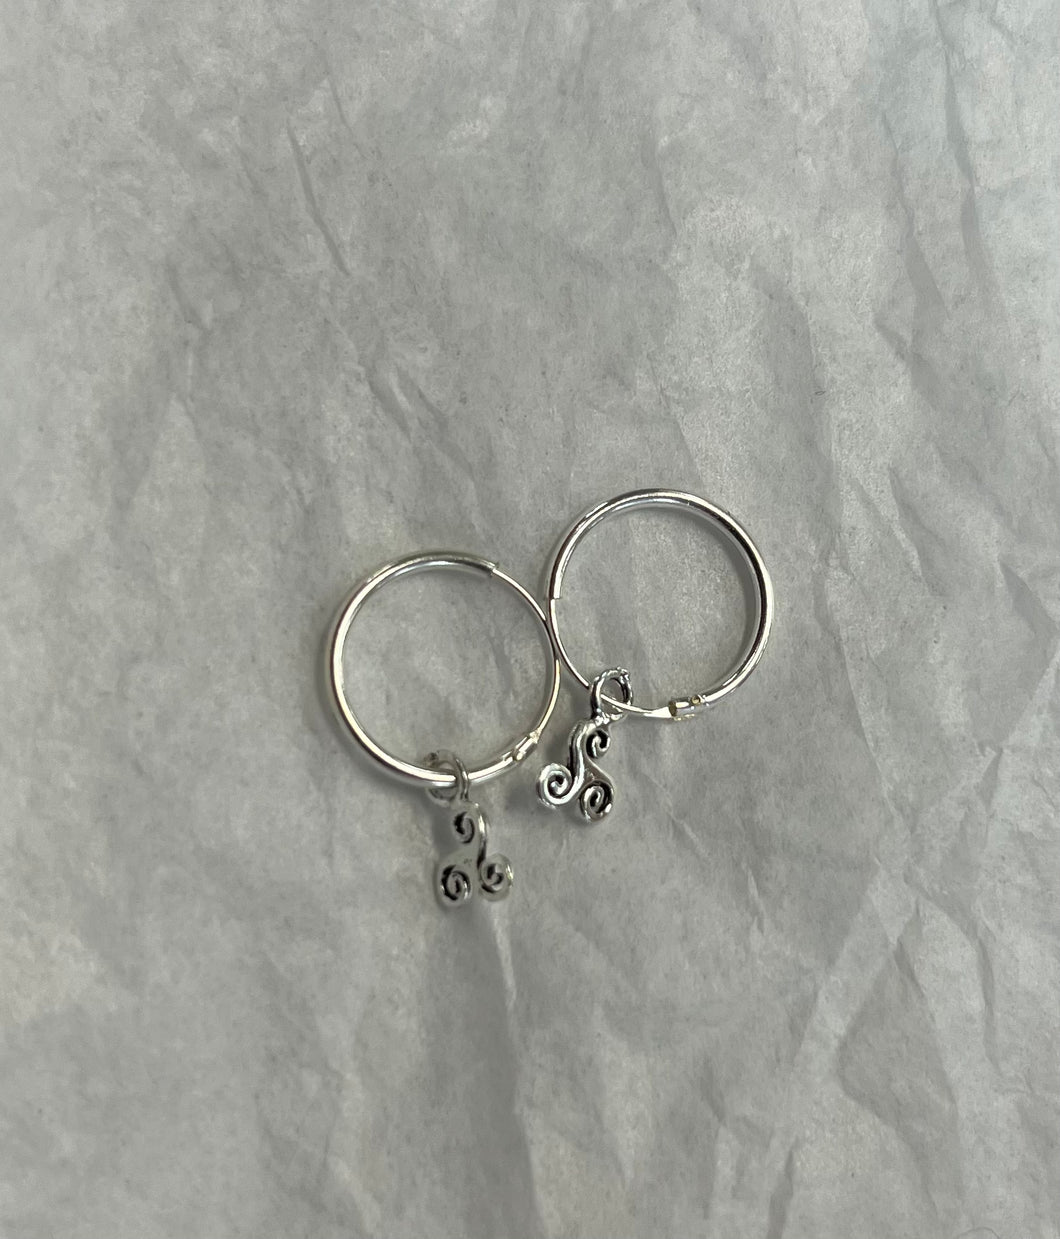 Small Silver Hoop Earring with Triskelion Charm Dangle